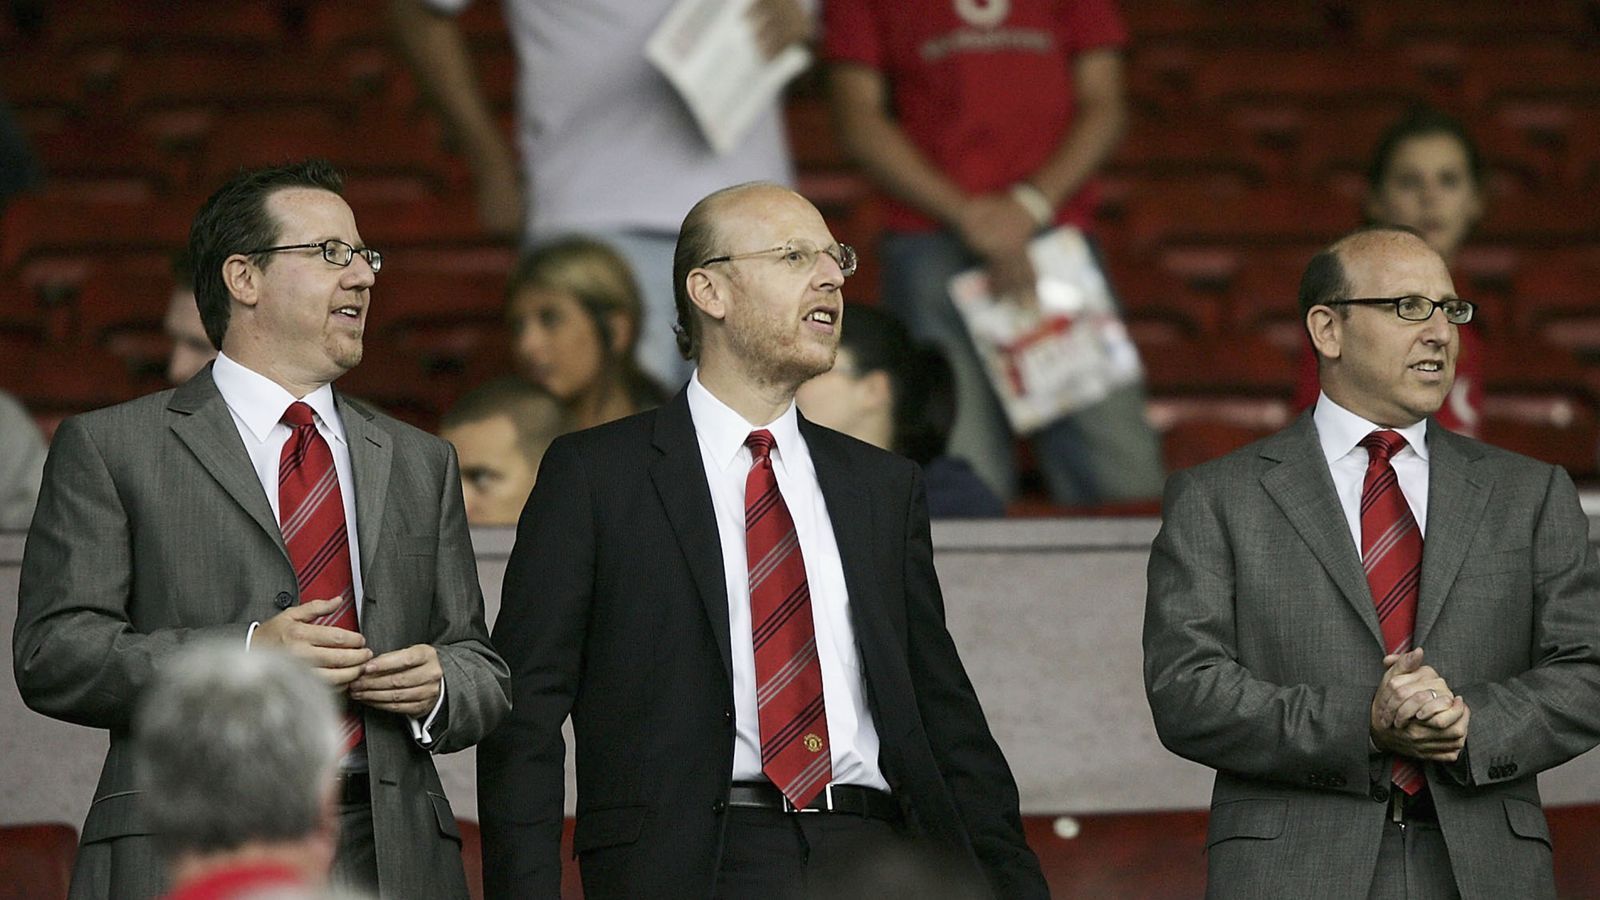 The Glazers Family eyeing selling Manchester United